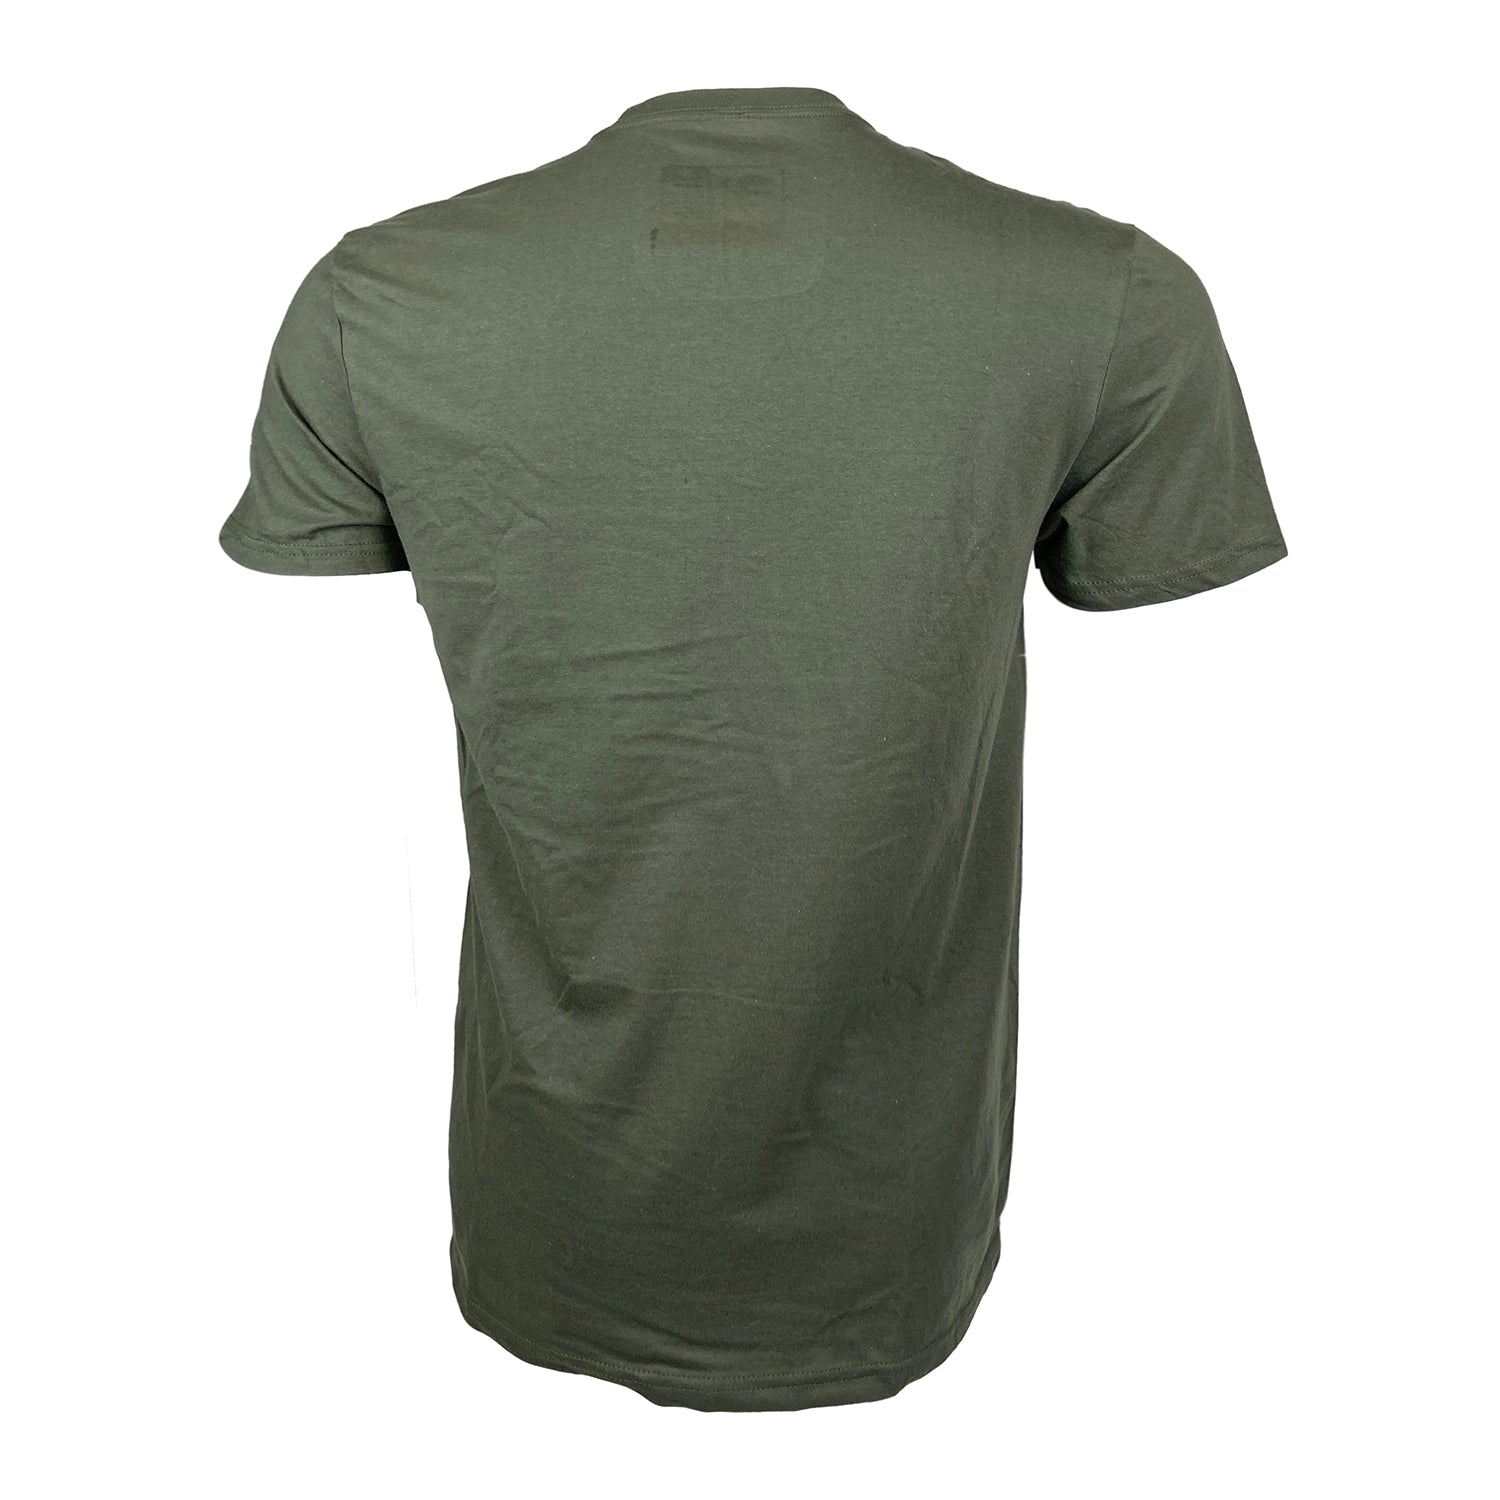 Green tee shown from the back.